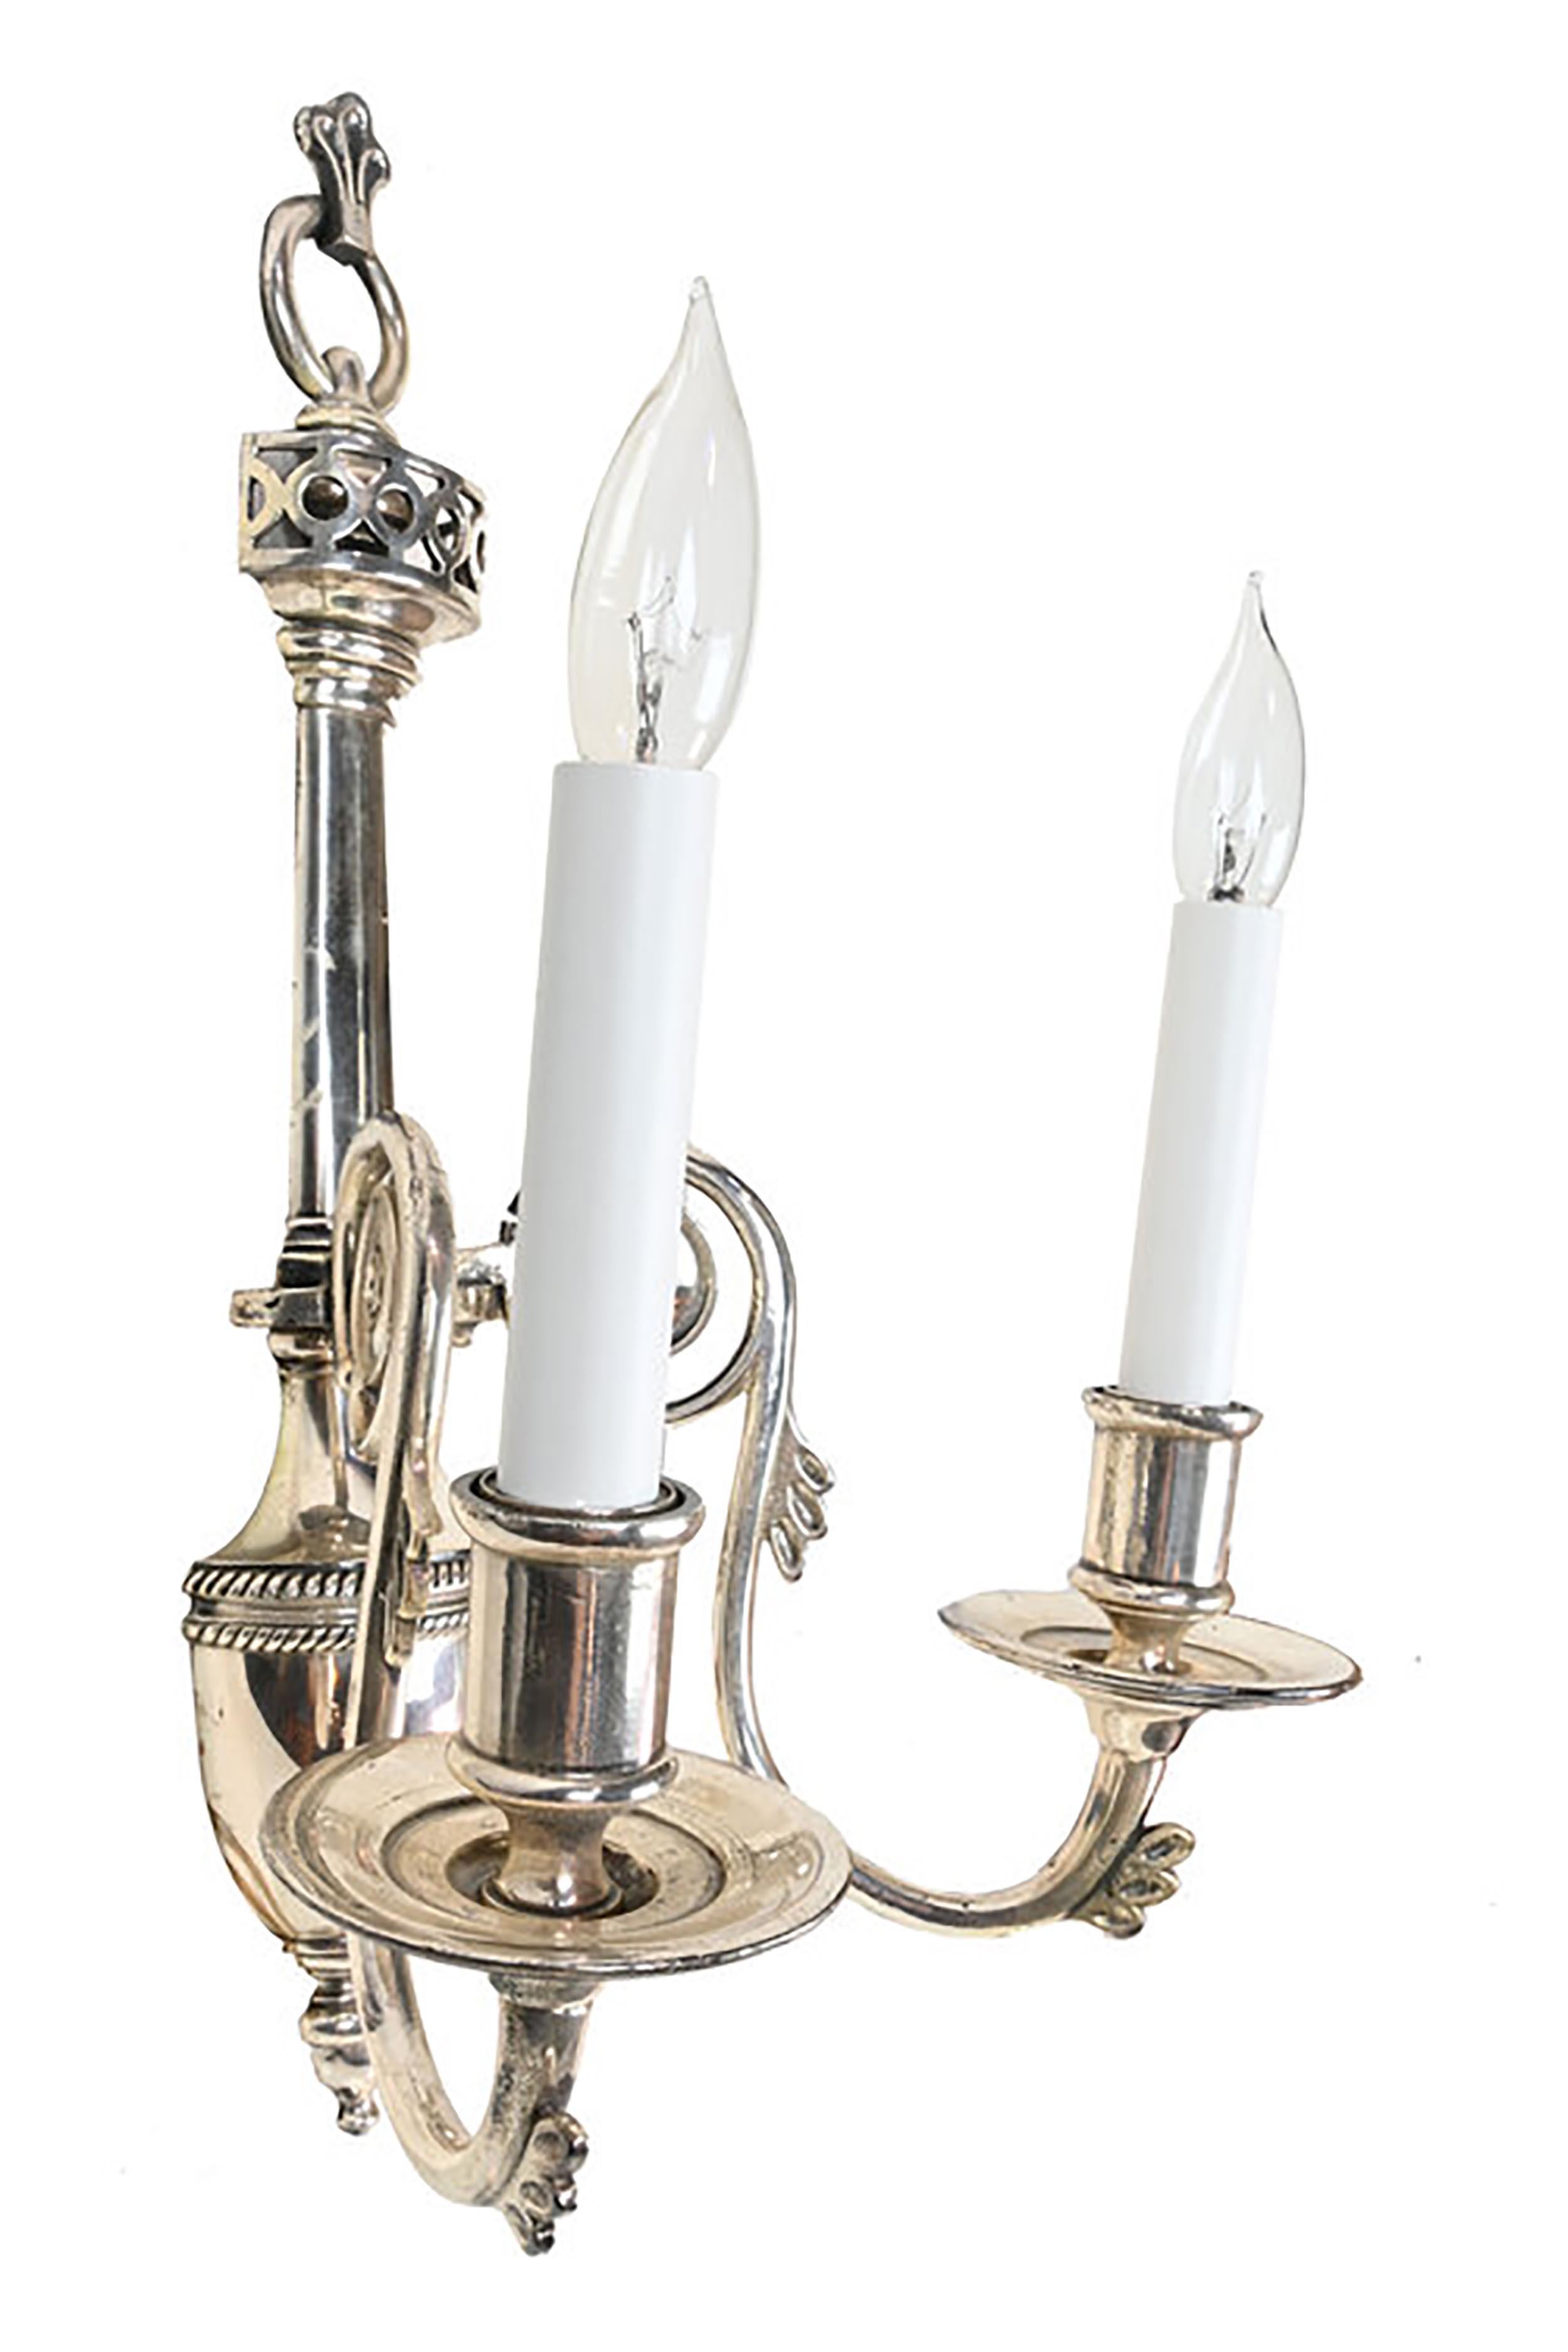 Plated Caldwell Early 20th C. Silver 3 Candle Wall Sconces